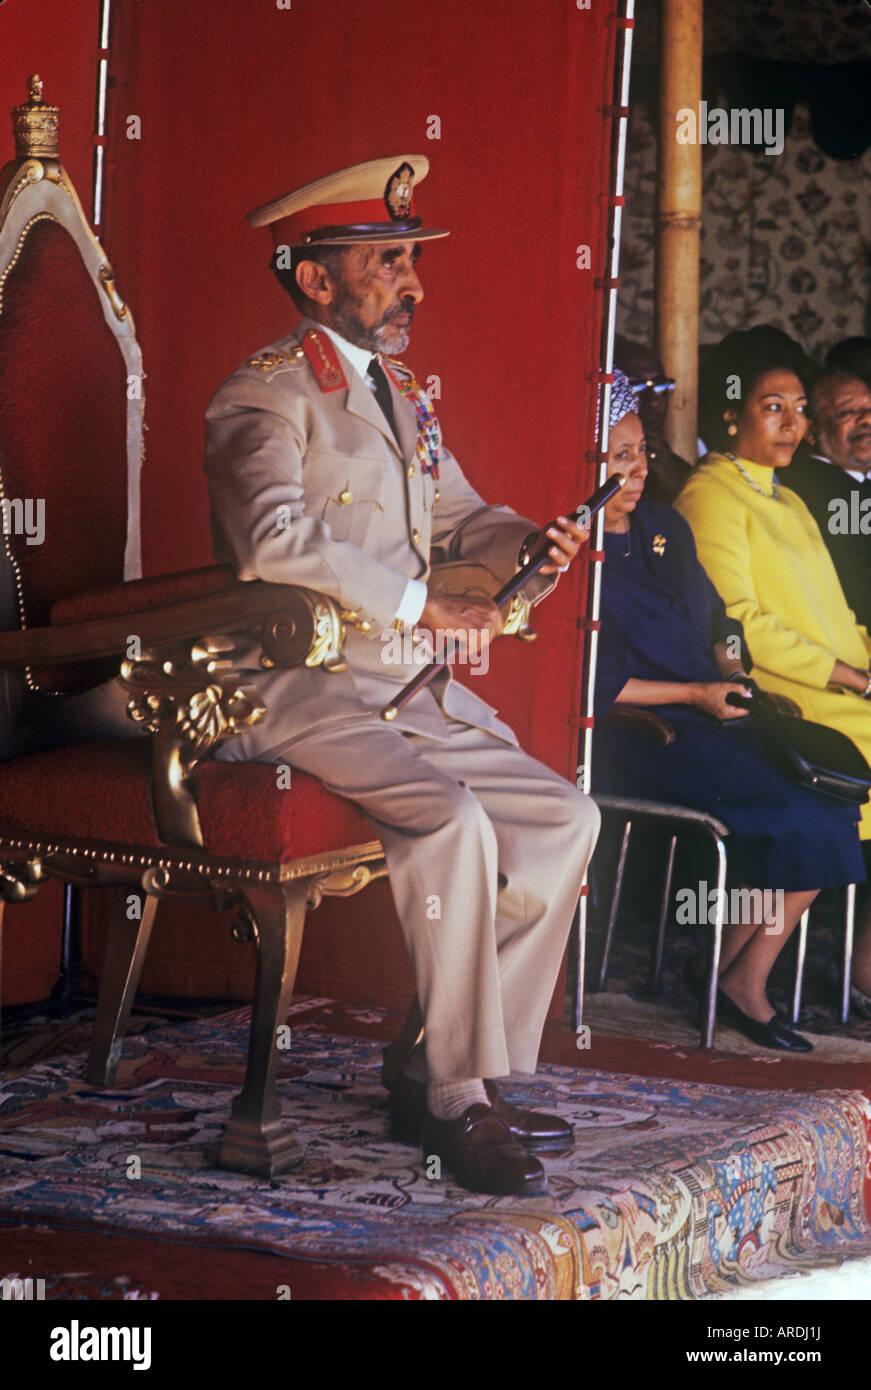 Emperor Haile Selassie of Ethiopia in military uniform during events marking the 40th anniversary of his coronation Stock Photo